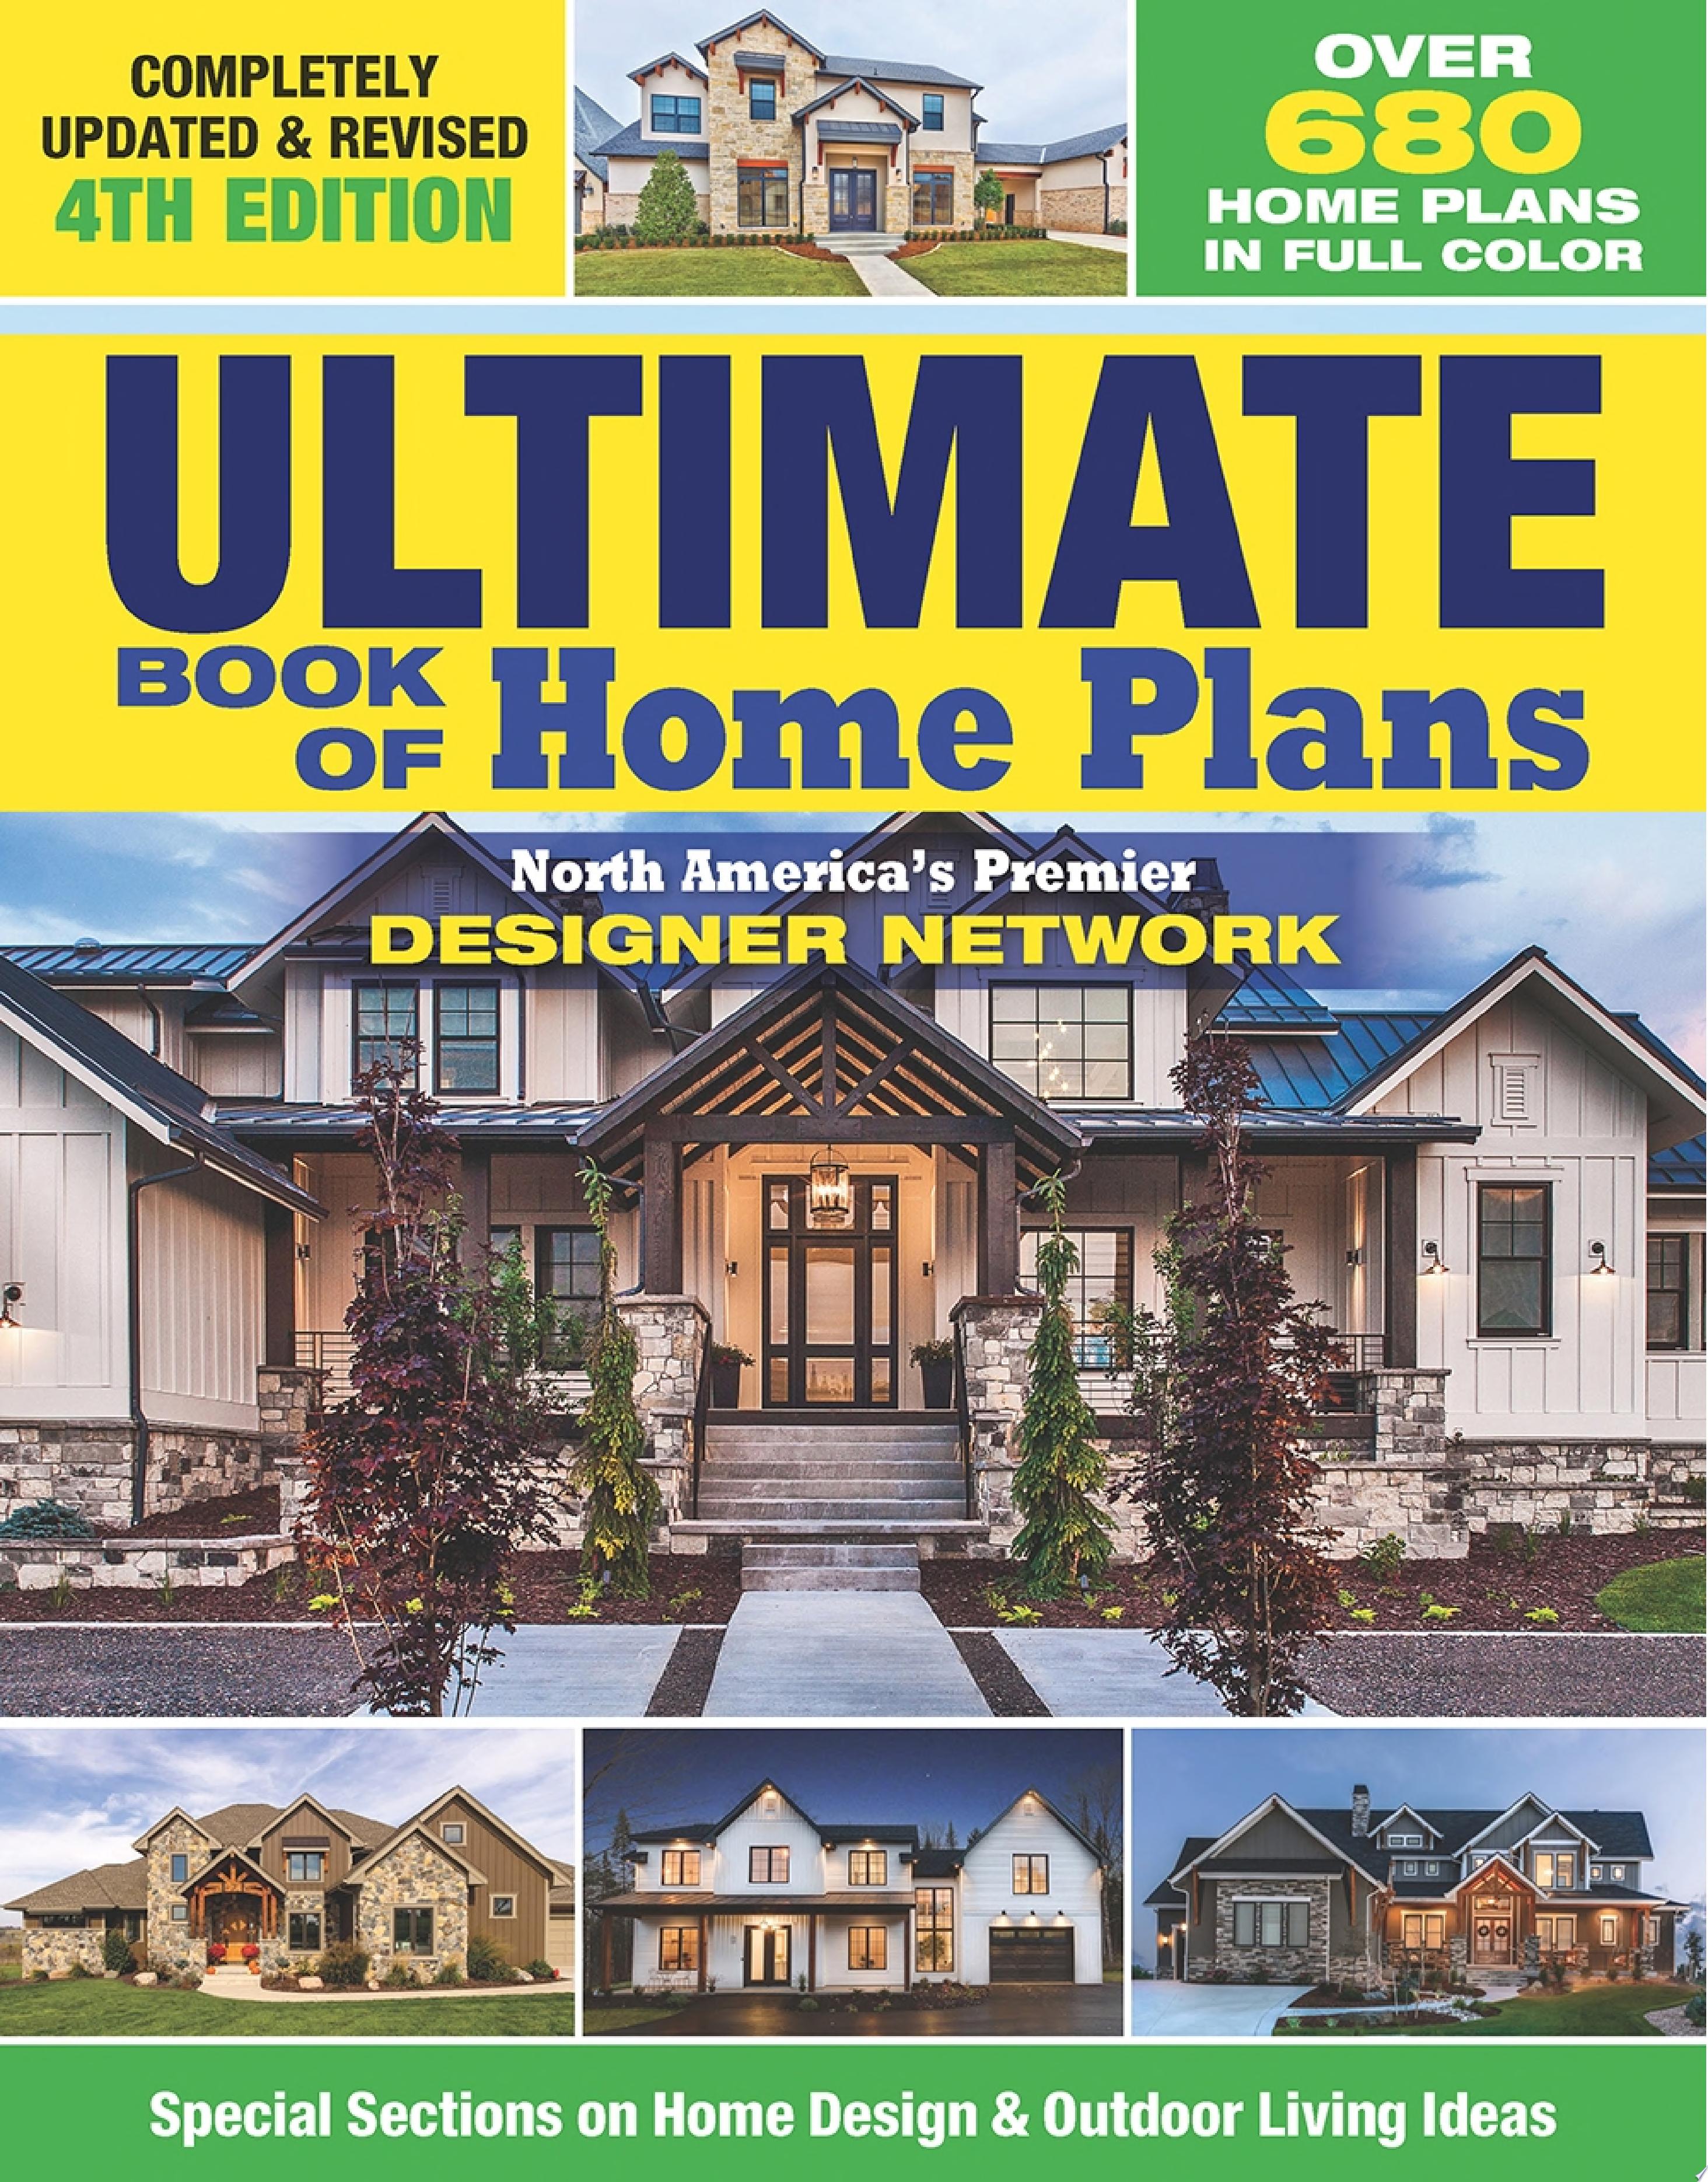 Image for "Ultimate Book of Home Plans, Completely Updated & Revised 4th Edition"